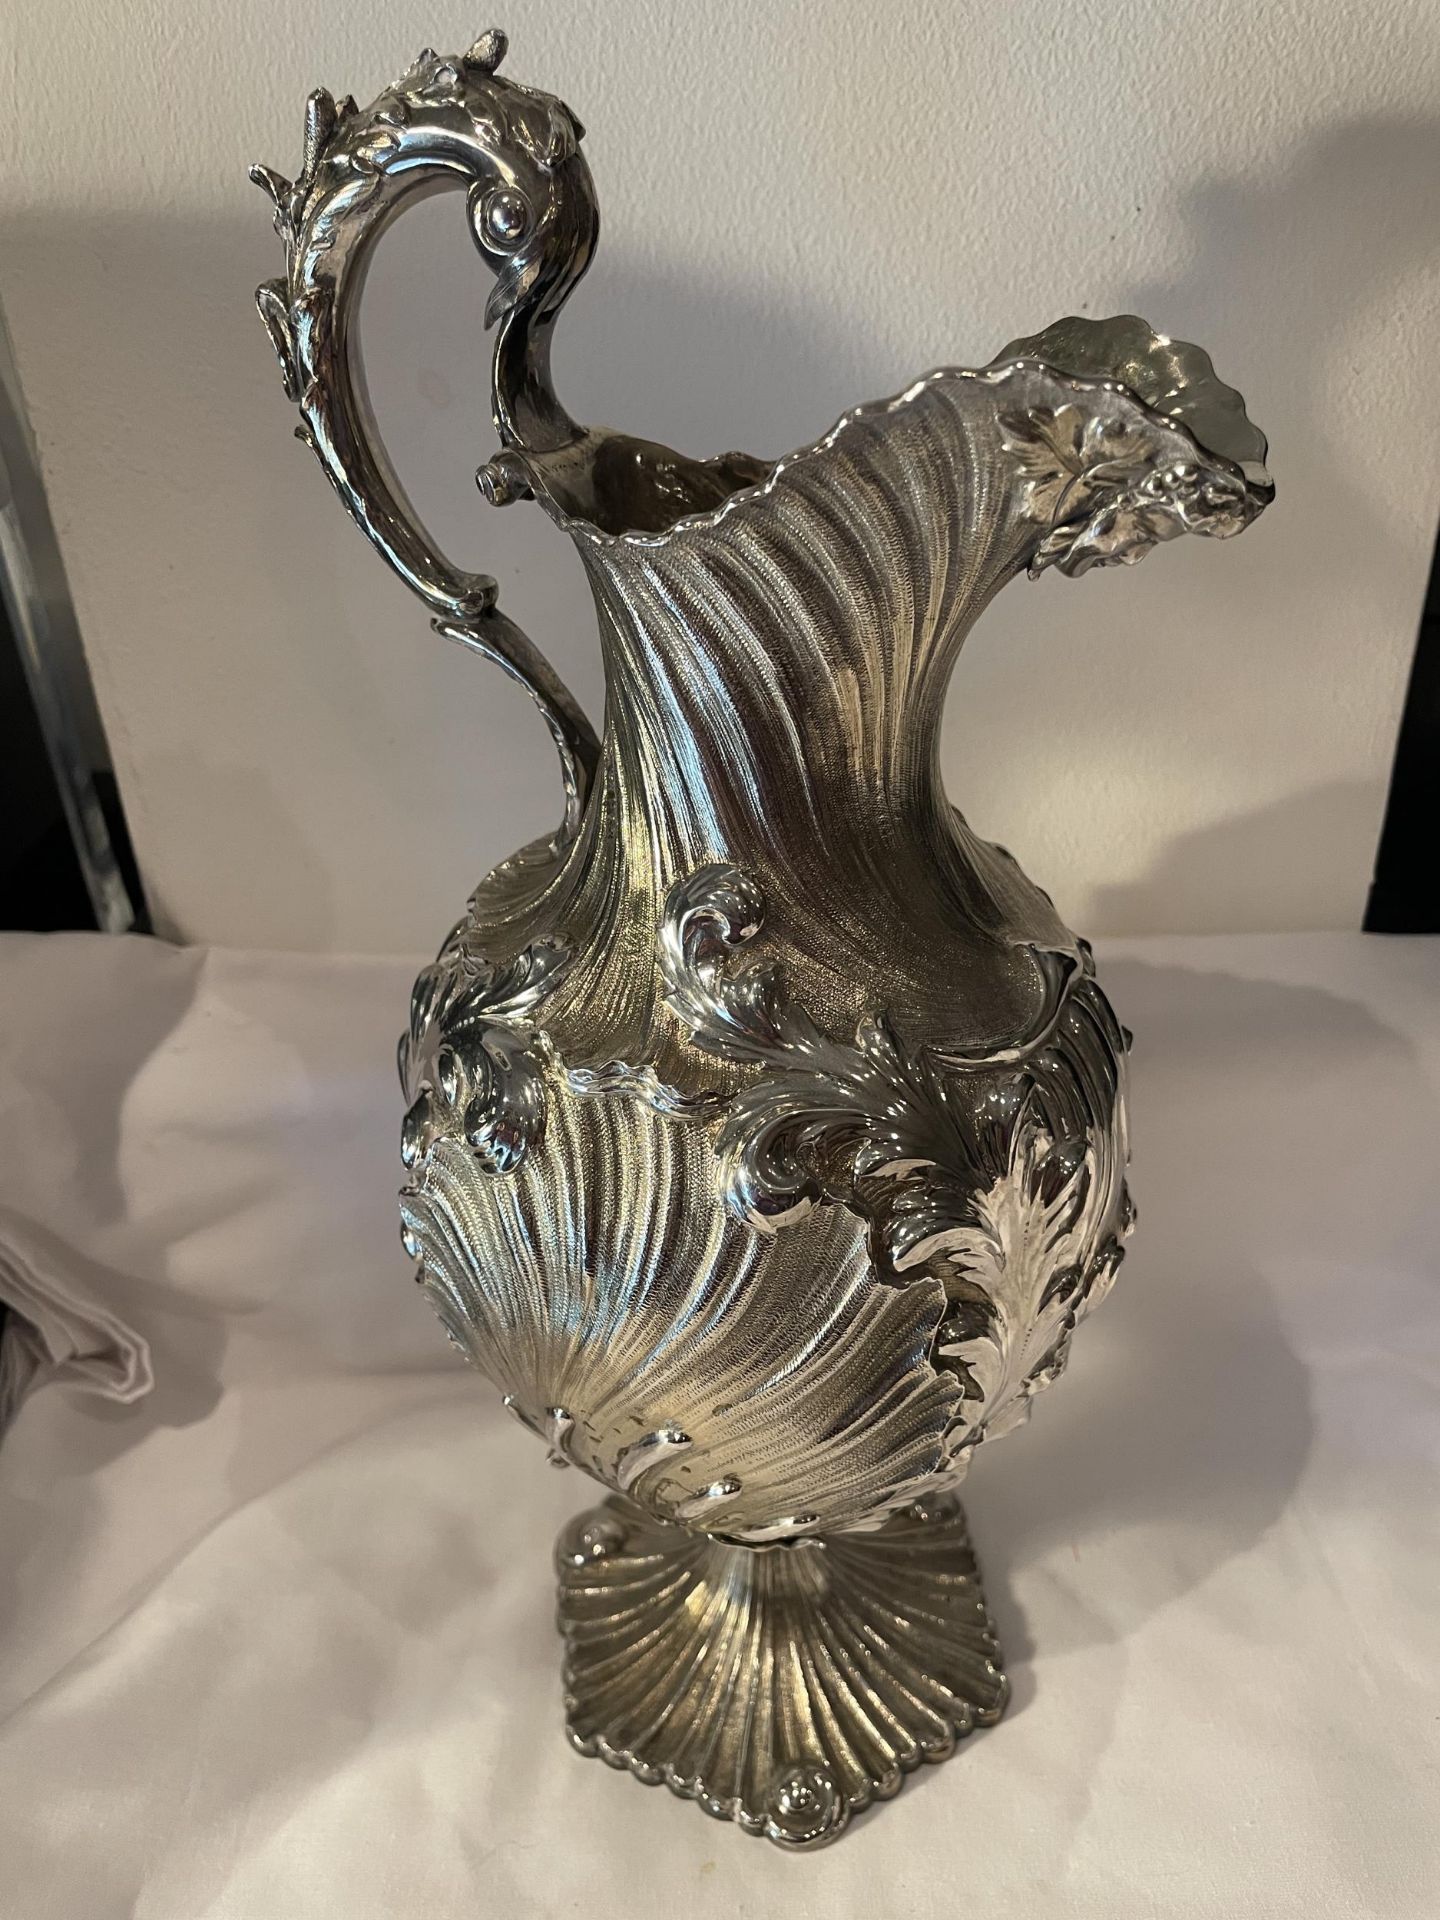 AN ORNATE 1830 HALLMARKED LONDON SILVER CLARET JUG, MAKER CHARLES FOX II GROSS WEIGHT 878 GRAMS - Image 14 of 18